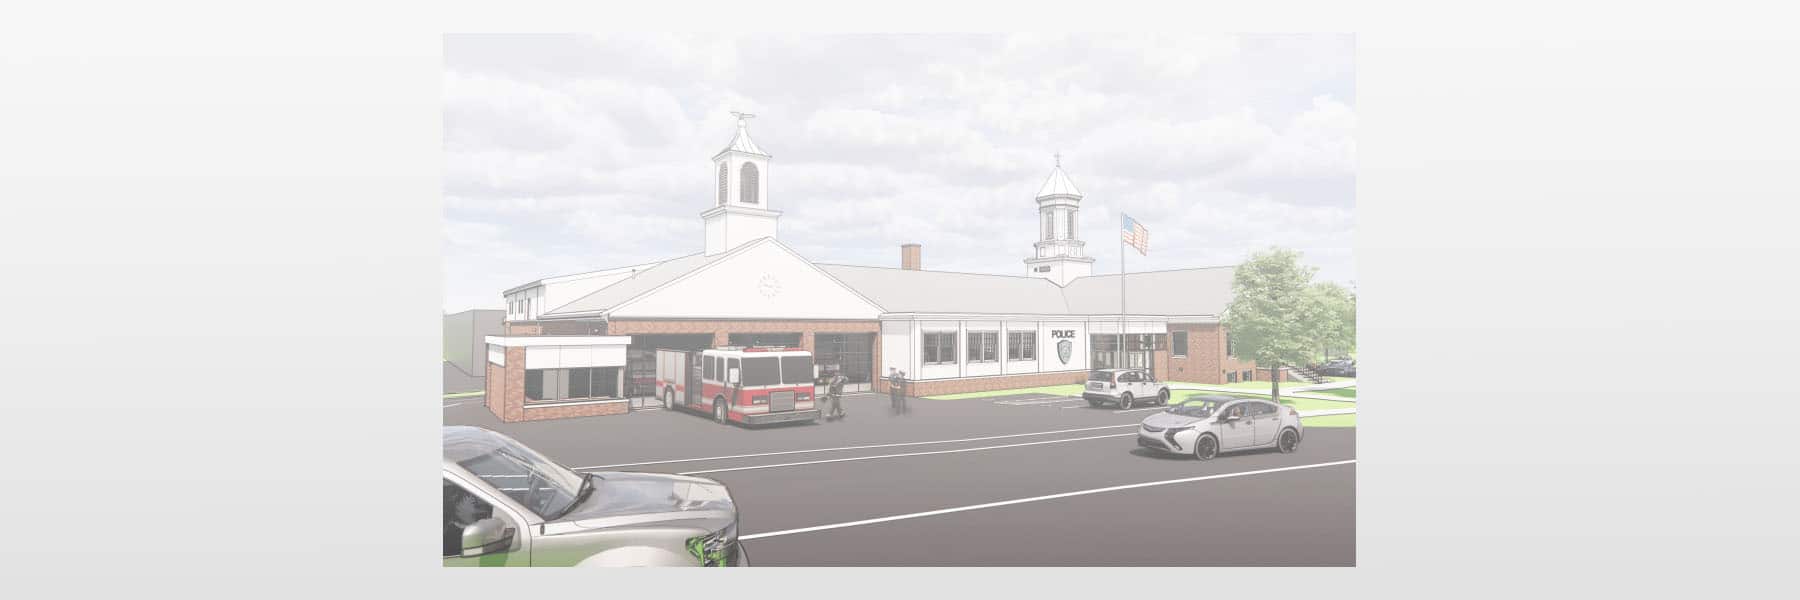 Proposed Public Safety & Town Hall Complex